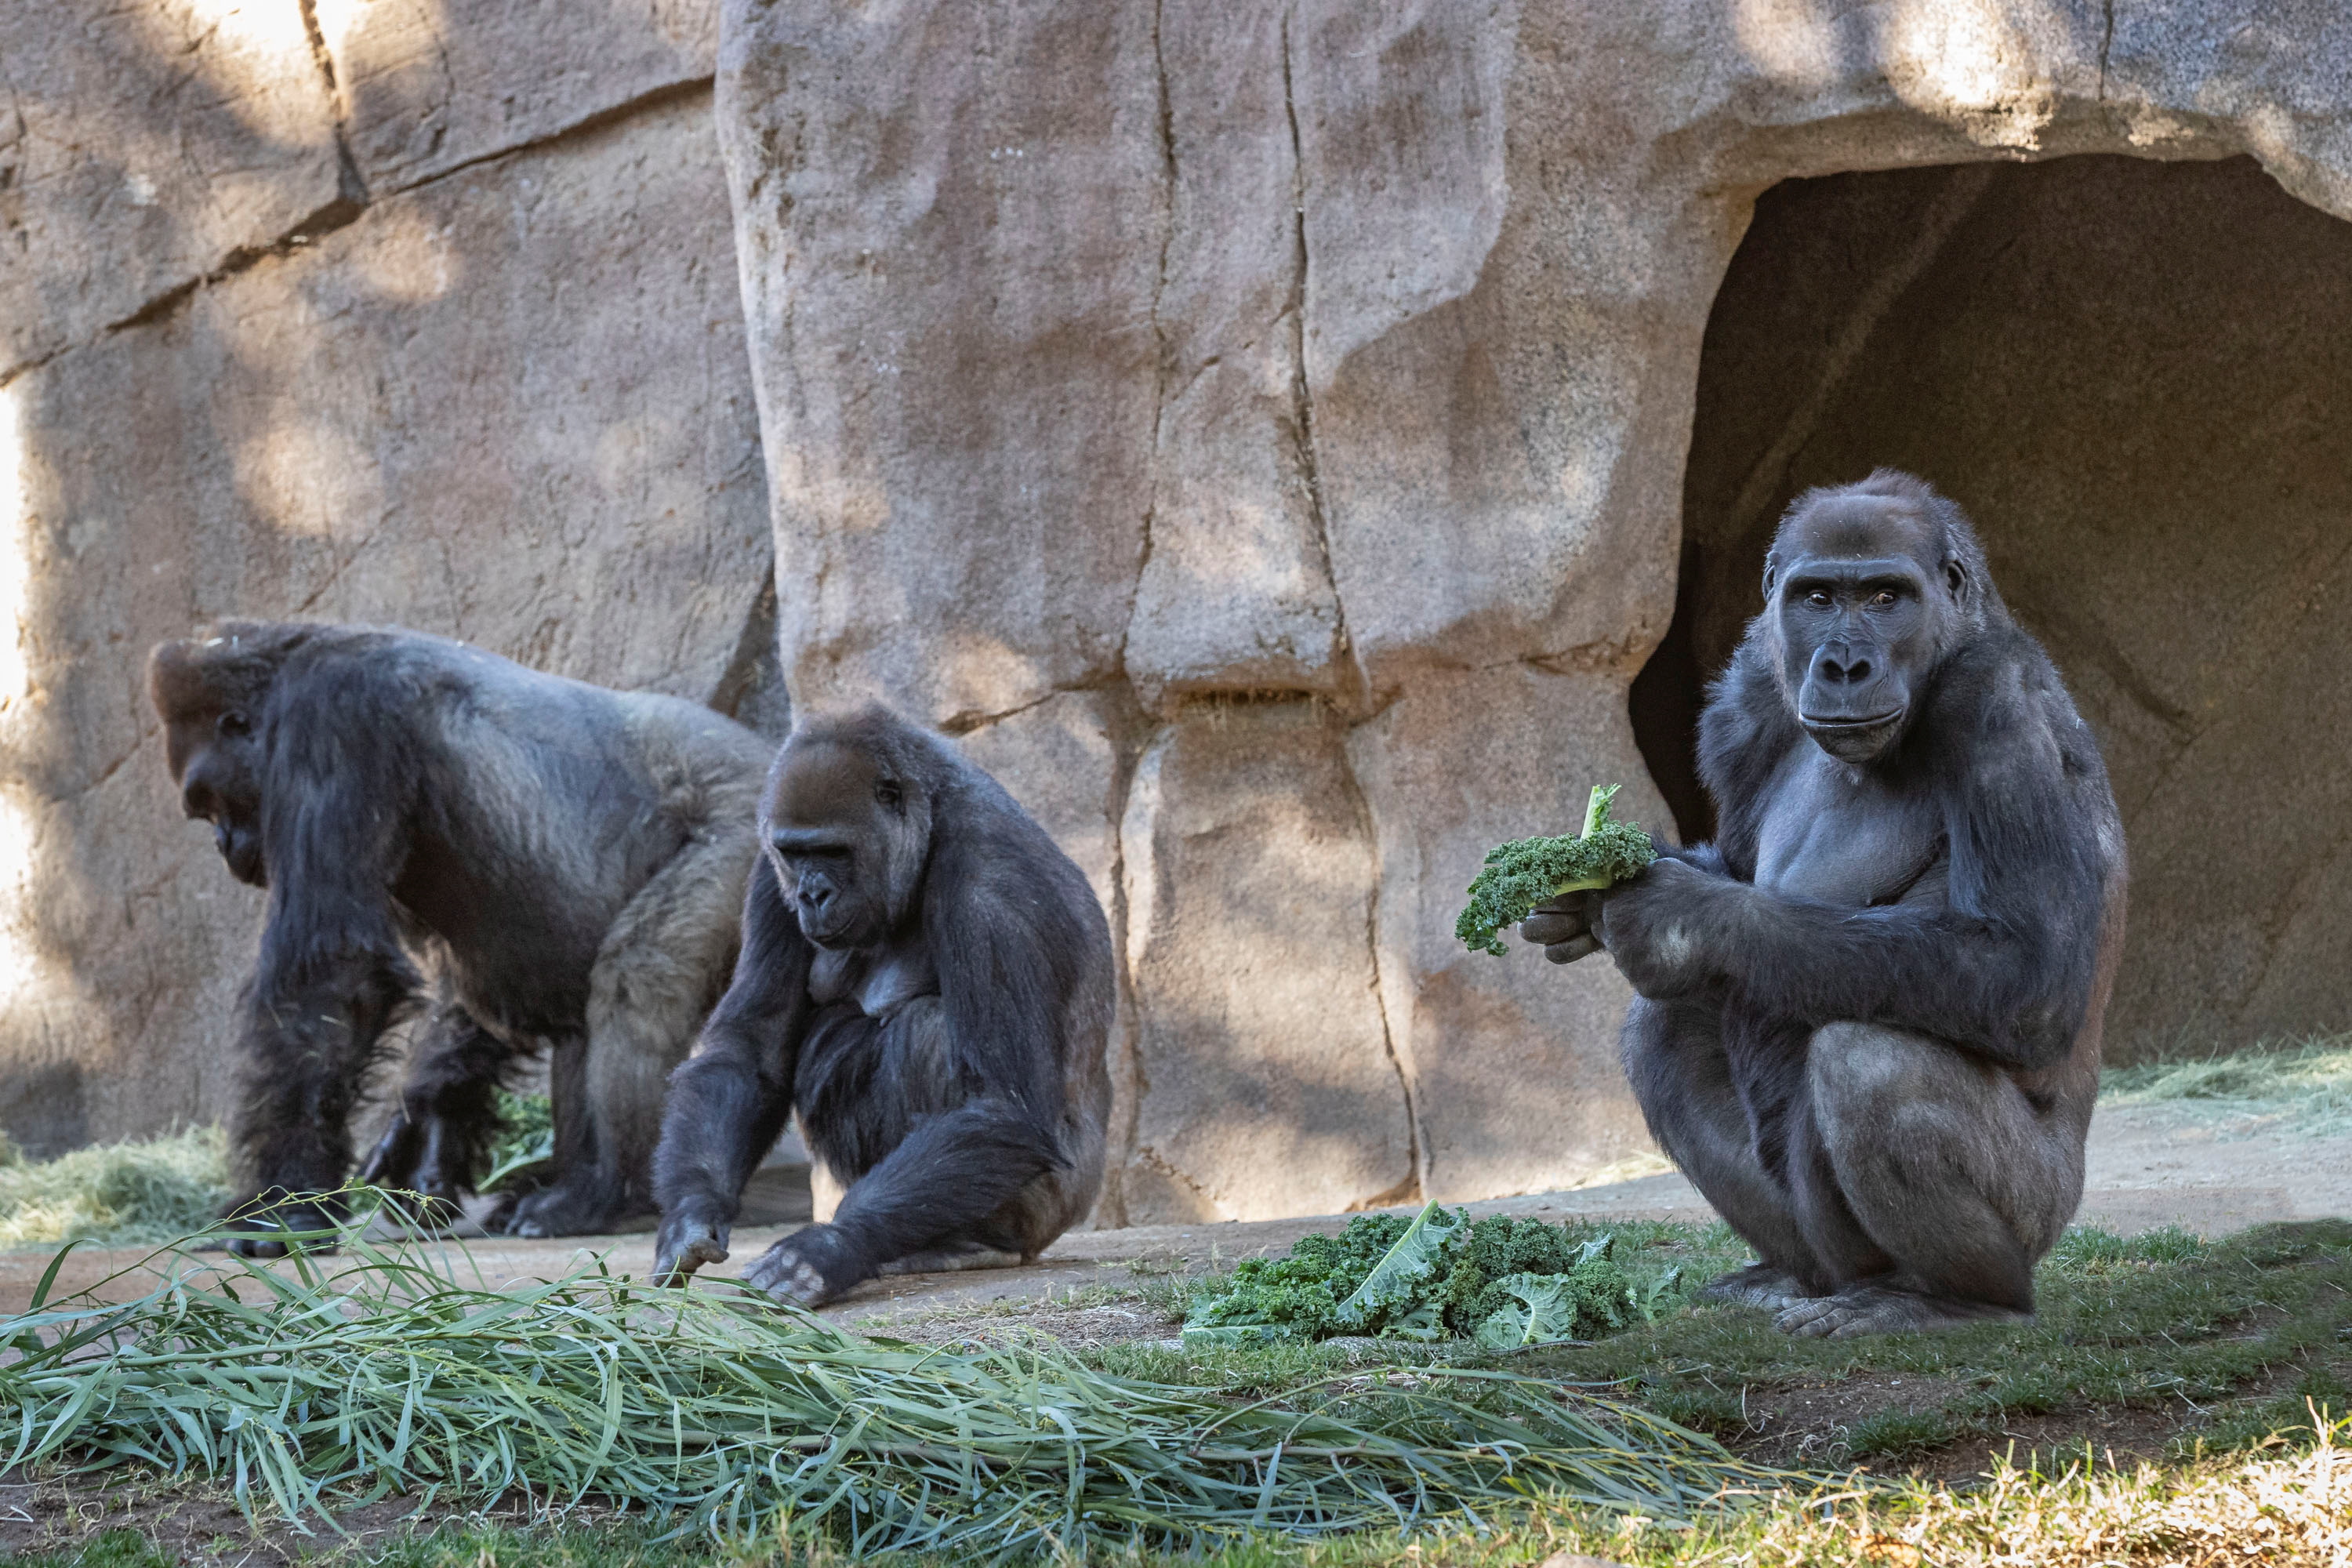 Gorillas sit after two of their troop tested positive for COVID-19 after falling ill, and a third gorilla appears also to be symptomatic, at the San Diego Zoo Safari Park in San Diego, California, US January 10, 2021. Photo: Ken Bohn/San Diego Zoo Global/Handout via Reuters